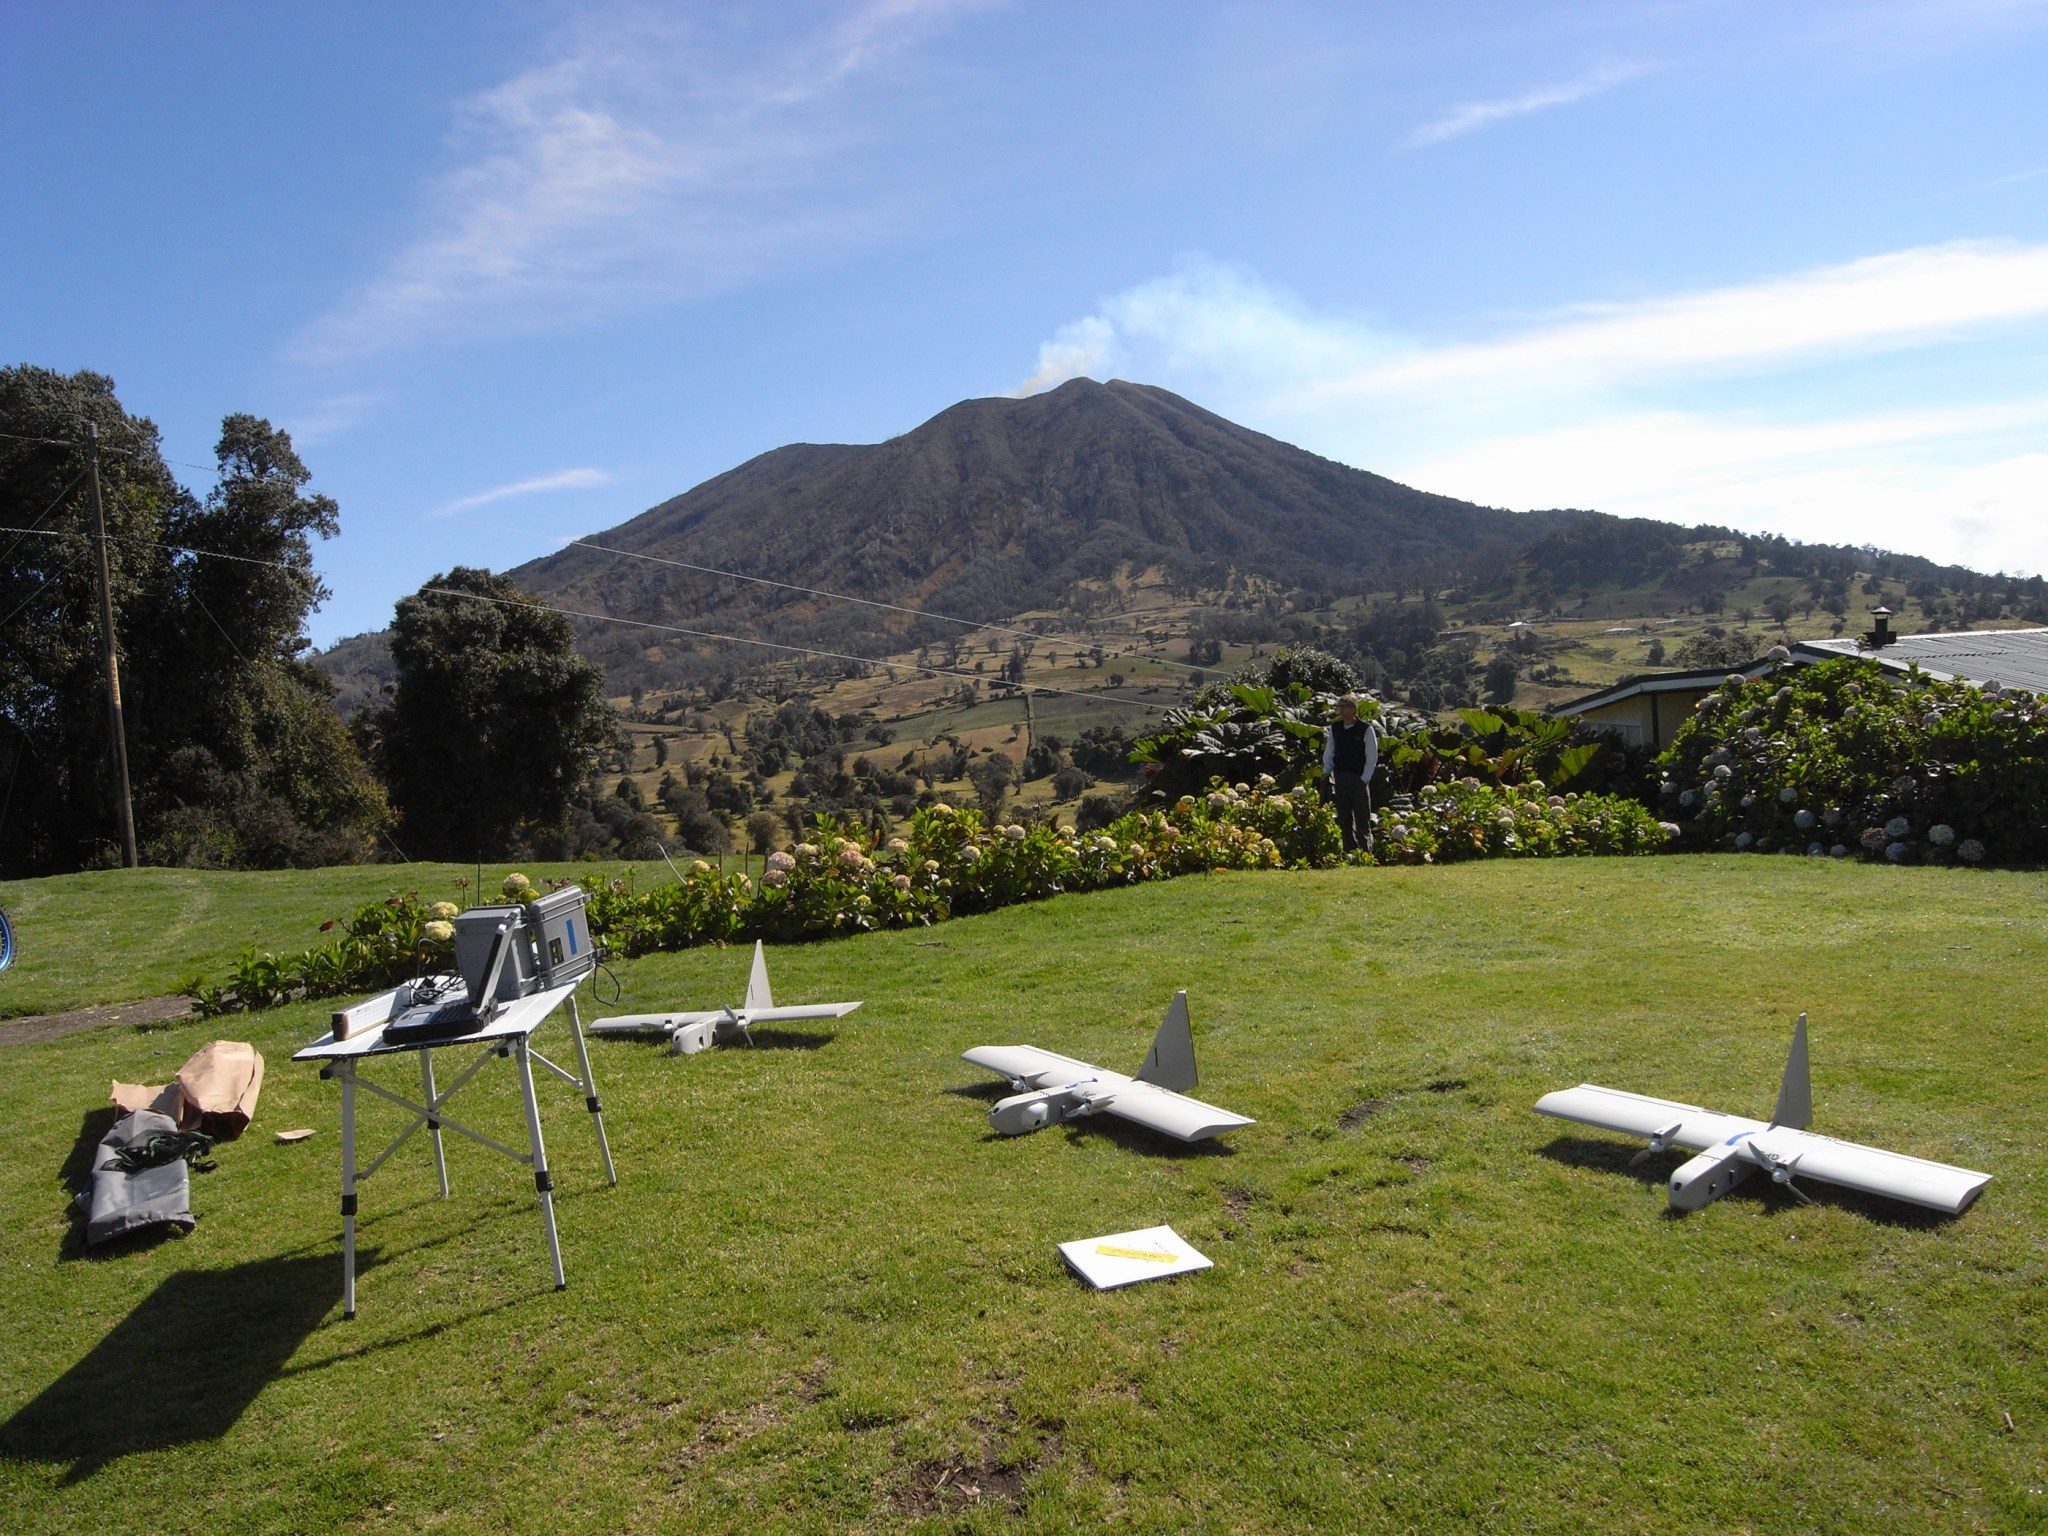 Green grass with series of small unmanned aircraft on ground